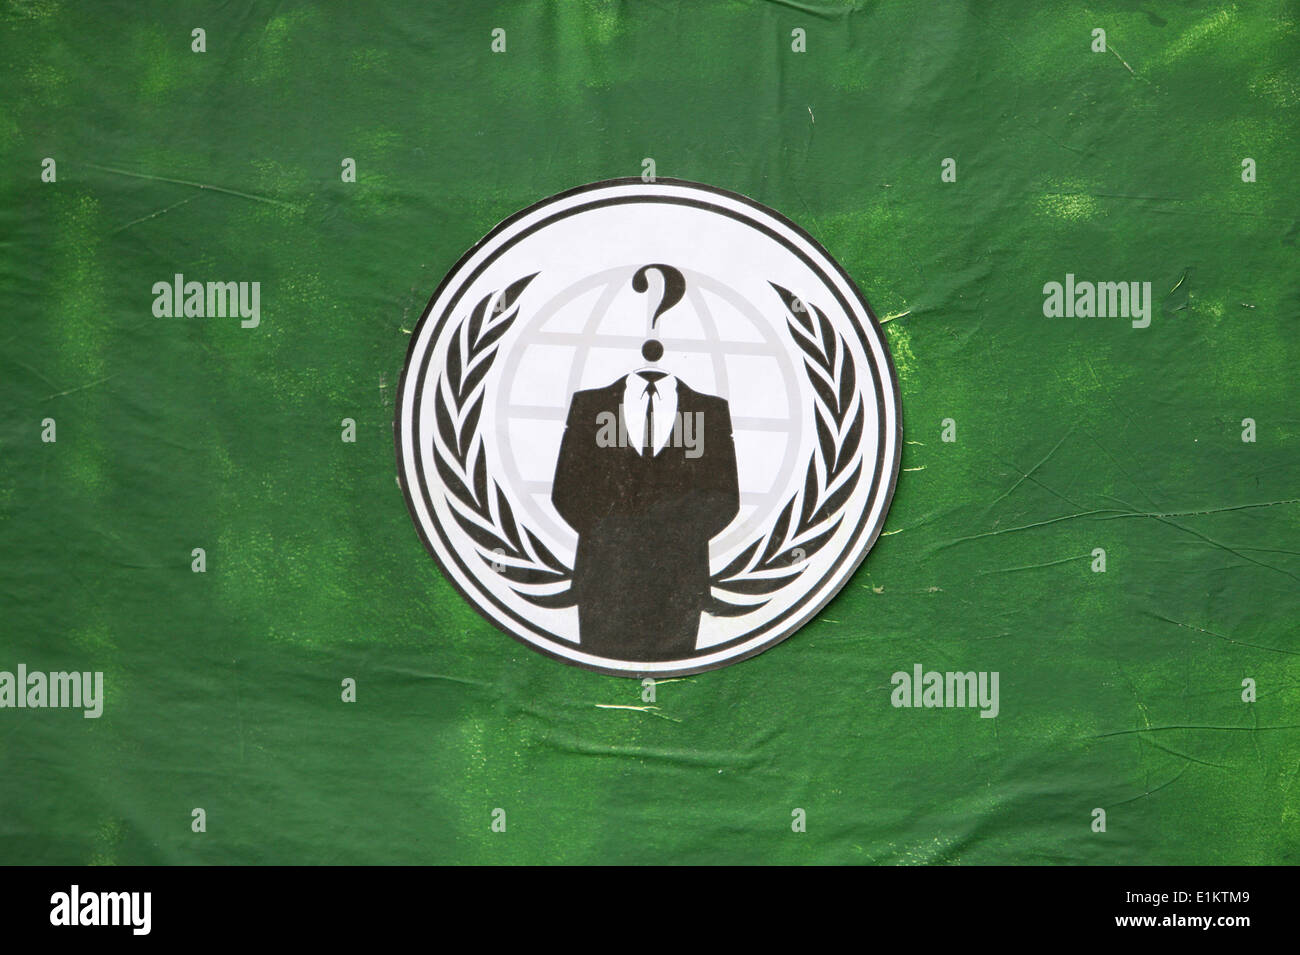 A flag conveying symbolism associated with the Anonymous. The imagery of the 'suit without a head' represents leaderless organiz Stock Photo